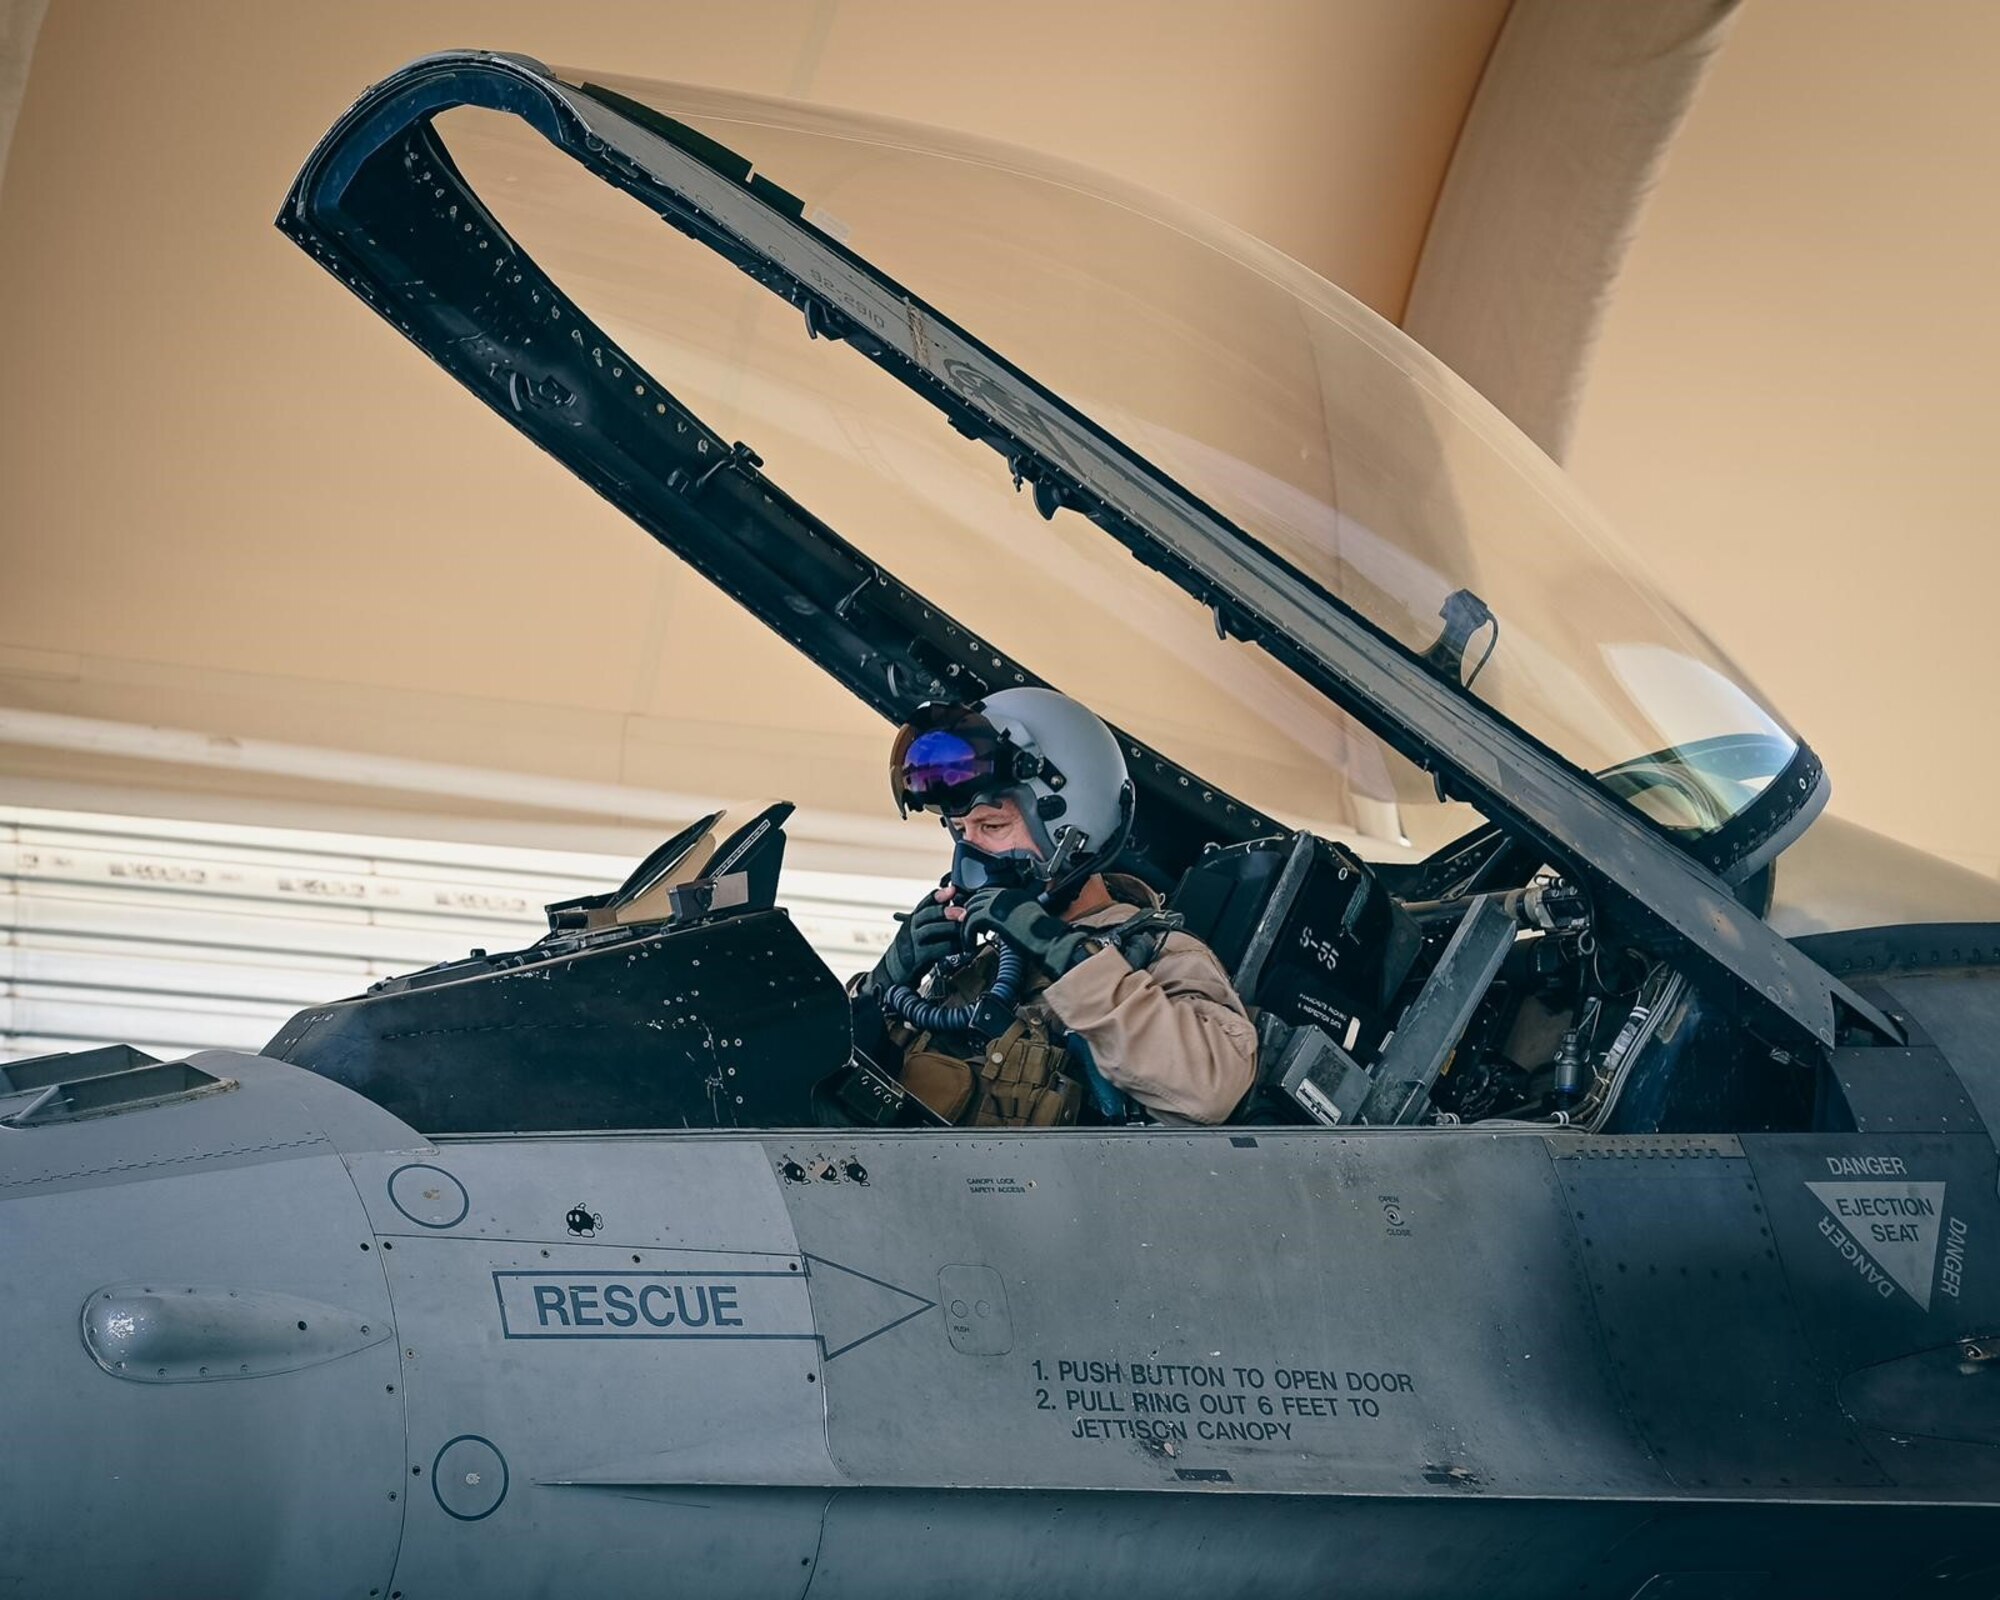 U.S. Air Force Lt. Gen. Alexus Grynkewich, 9th Air Force (Air Forces Central) commander, prepares for flight at Prince Sultan Air Base, Kingdom of Saudi Arabia, Apr. 4, 2023. During the mission, the general flew over airspace in Syria, in support of Operation Inherent Resolve and the Coalition service members deployed in the region who work with Syrian Democratic Forces to battle the Islamic State in Iraq and Syria. Since the beginning of March, Russian aircraft have violated deconfliction protocols, which were established between the Coalition and Russia to avoid miscalculations and potentially dangerous encounters in the airspace in 2019, 63 times. (U.S. Air Force photo by Staff Sgt. Micah Coate)